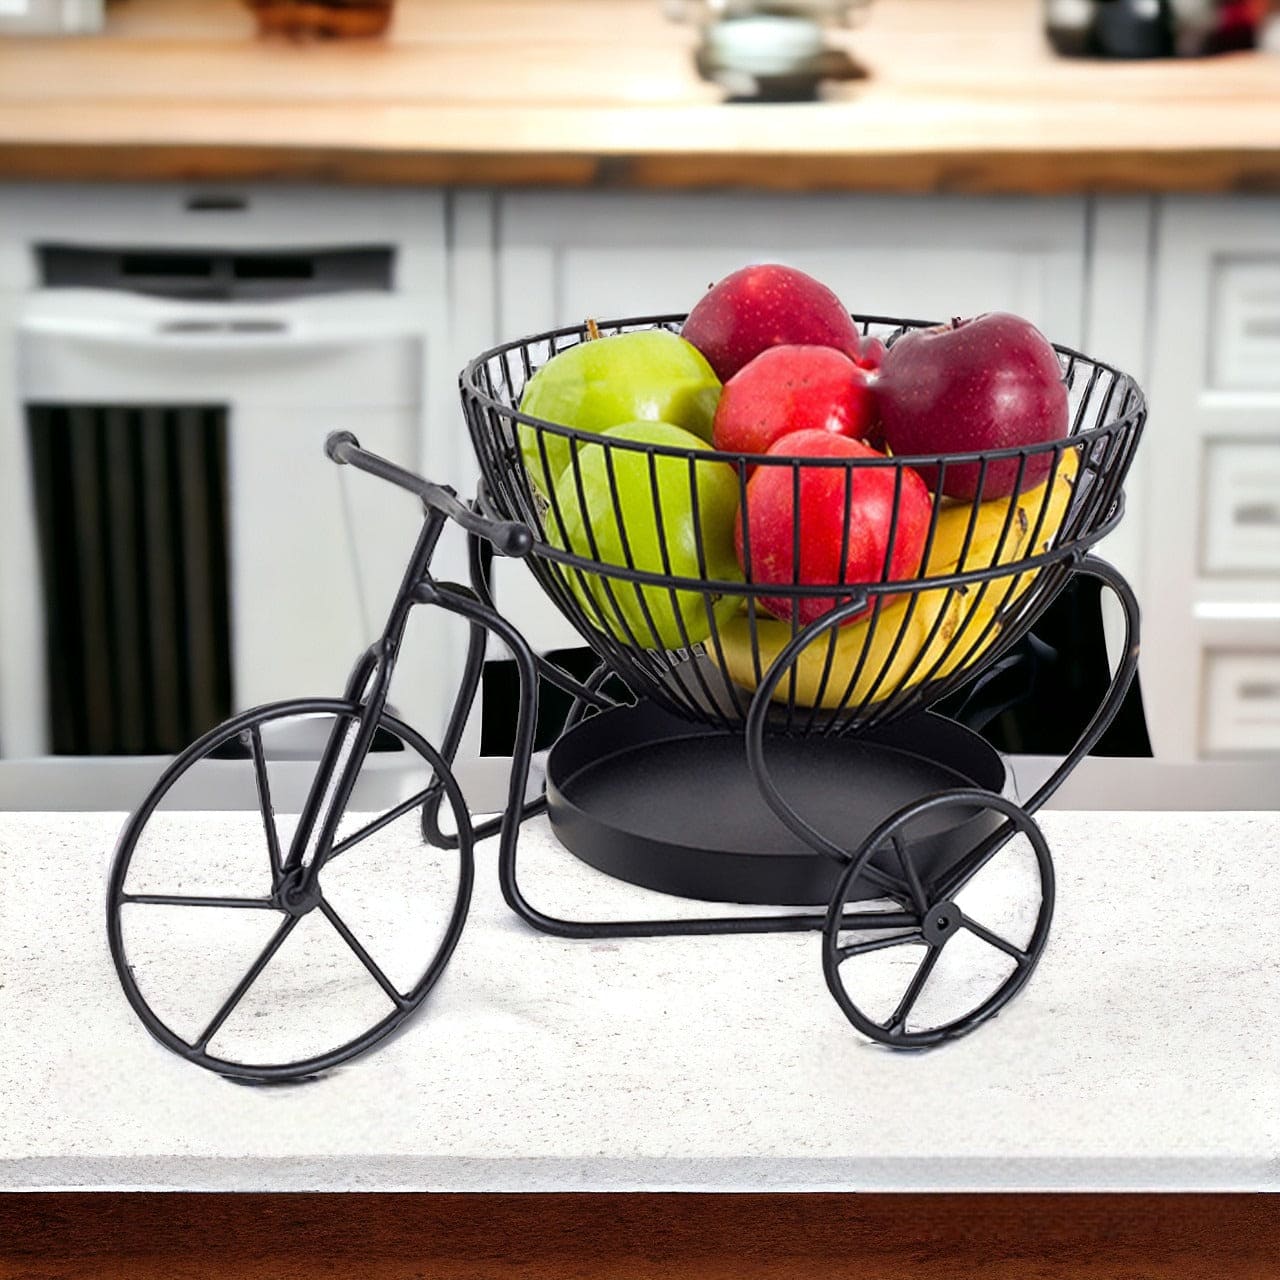 Tricycle Metal Fruit Basket, Double Layer Hollow Design Fruit Plate, Portable Kitchen Storage Countertops Shelf Rack, Metal Black Fruit And Vegetable Storage Stand, 2 Tier Metal Bread Basket